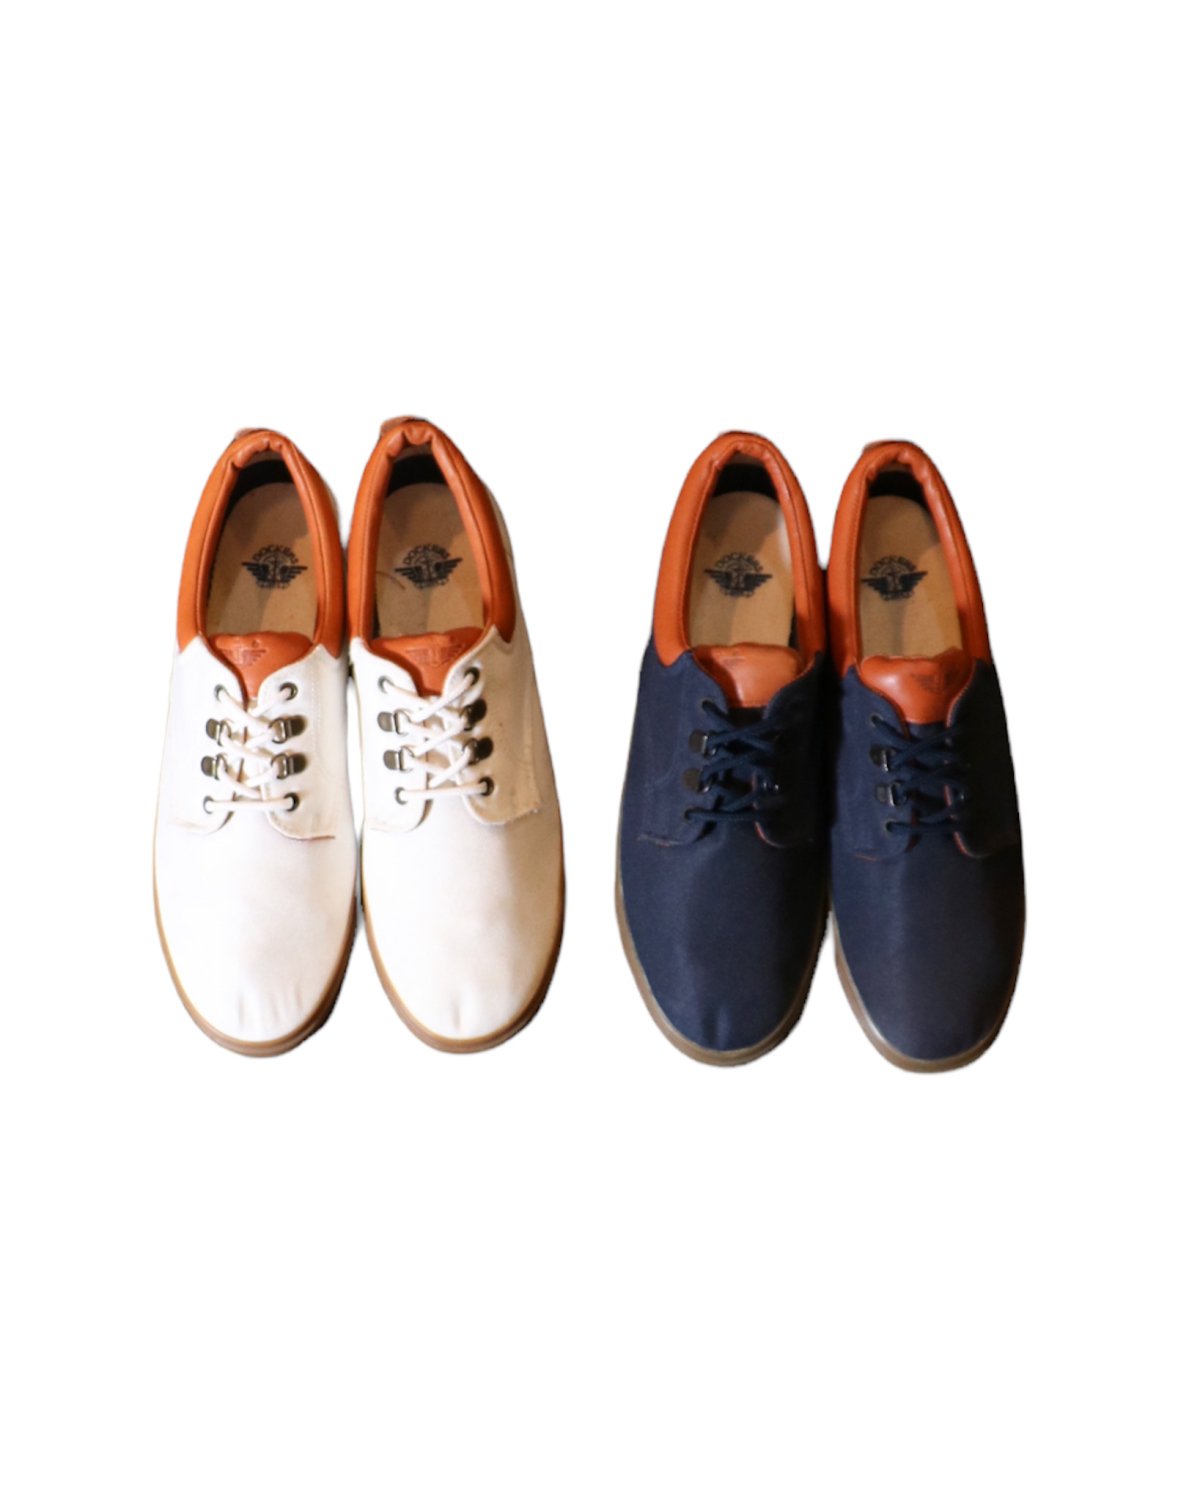 “DOCKERS” Canvas Shoes 